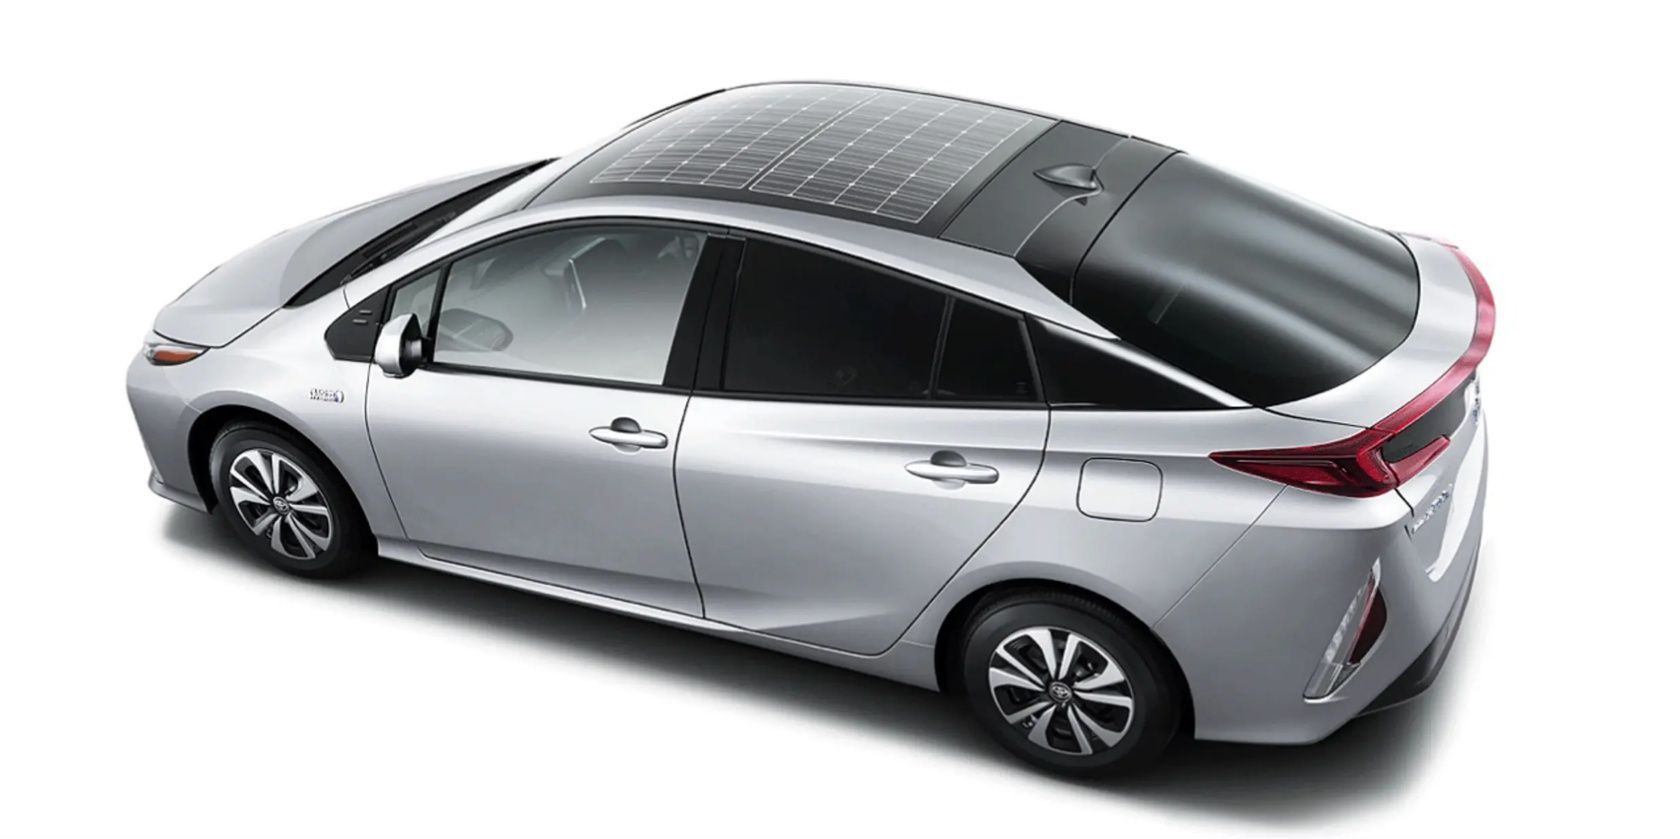 Toyota Prius With Solar Roof